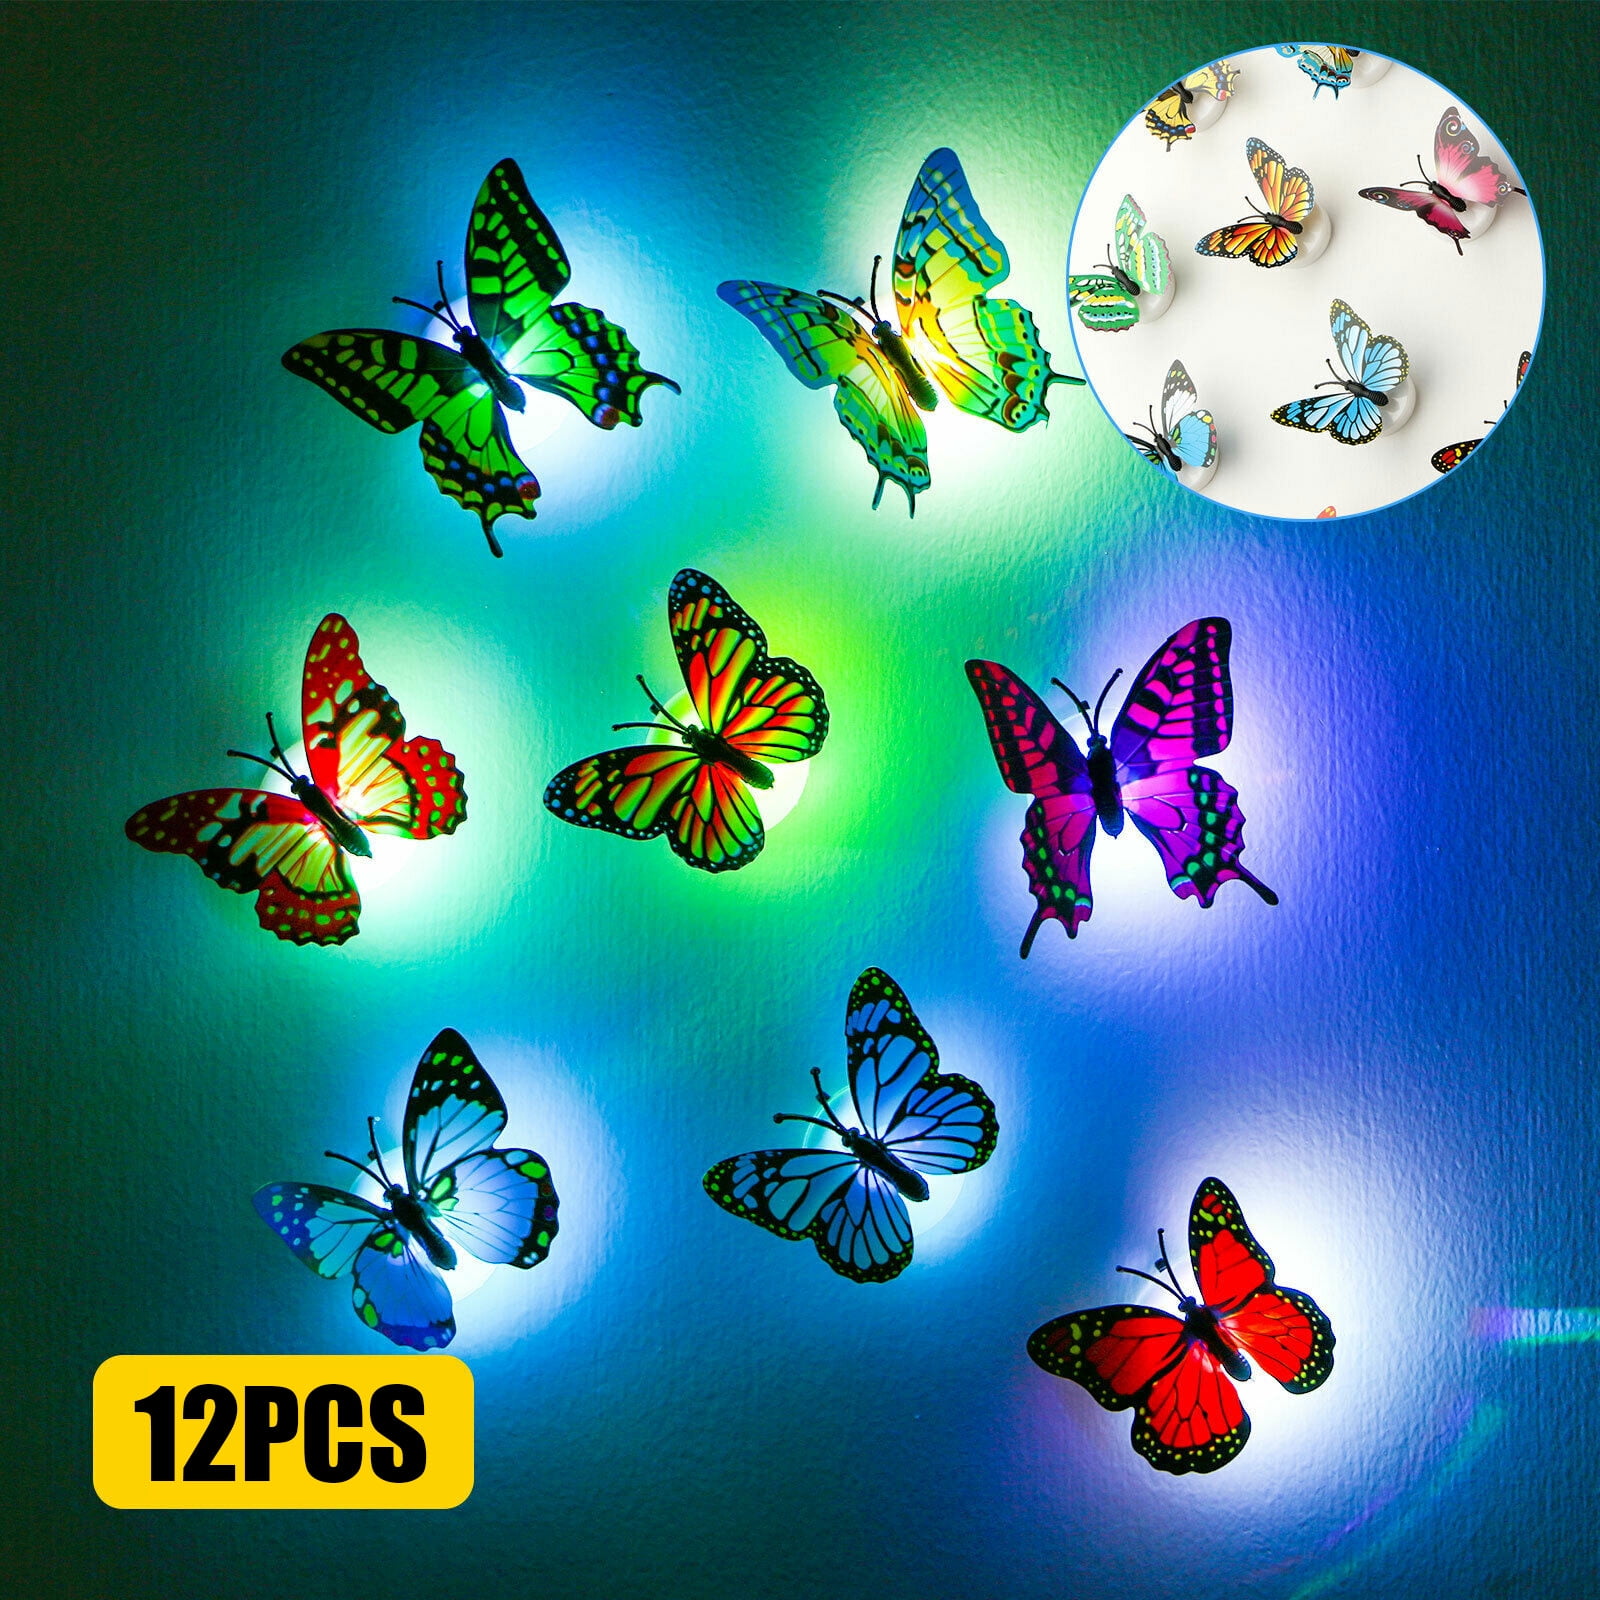 6 Butterfly Decals Stickers Wall Mirror Home in Flight 3D Butterflies Removable 